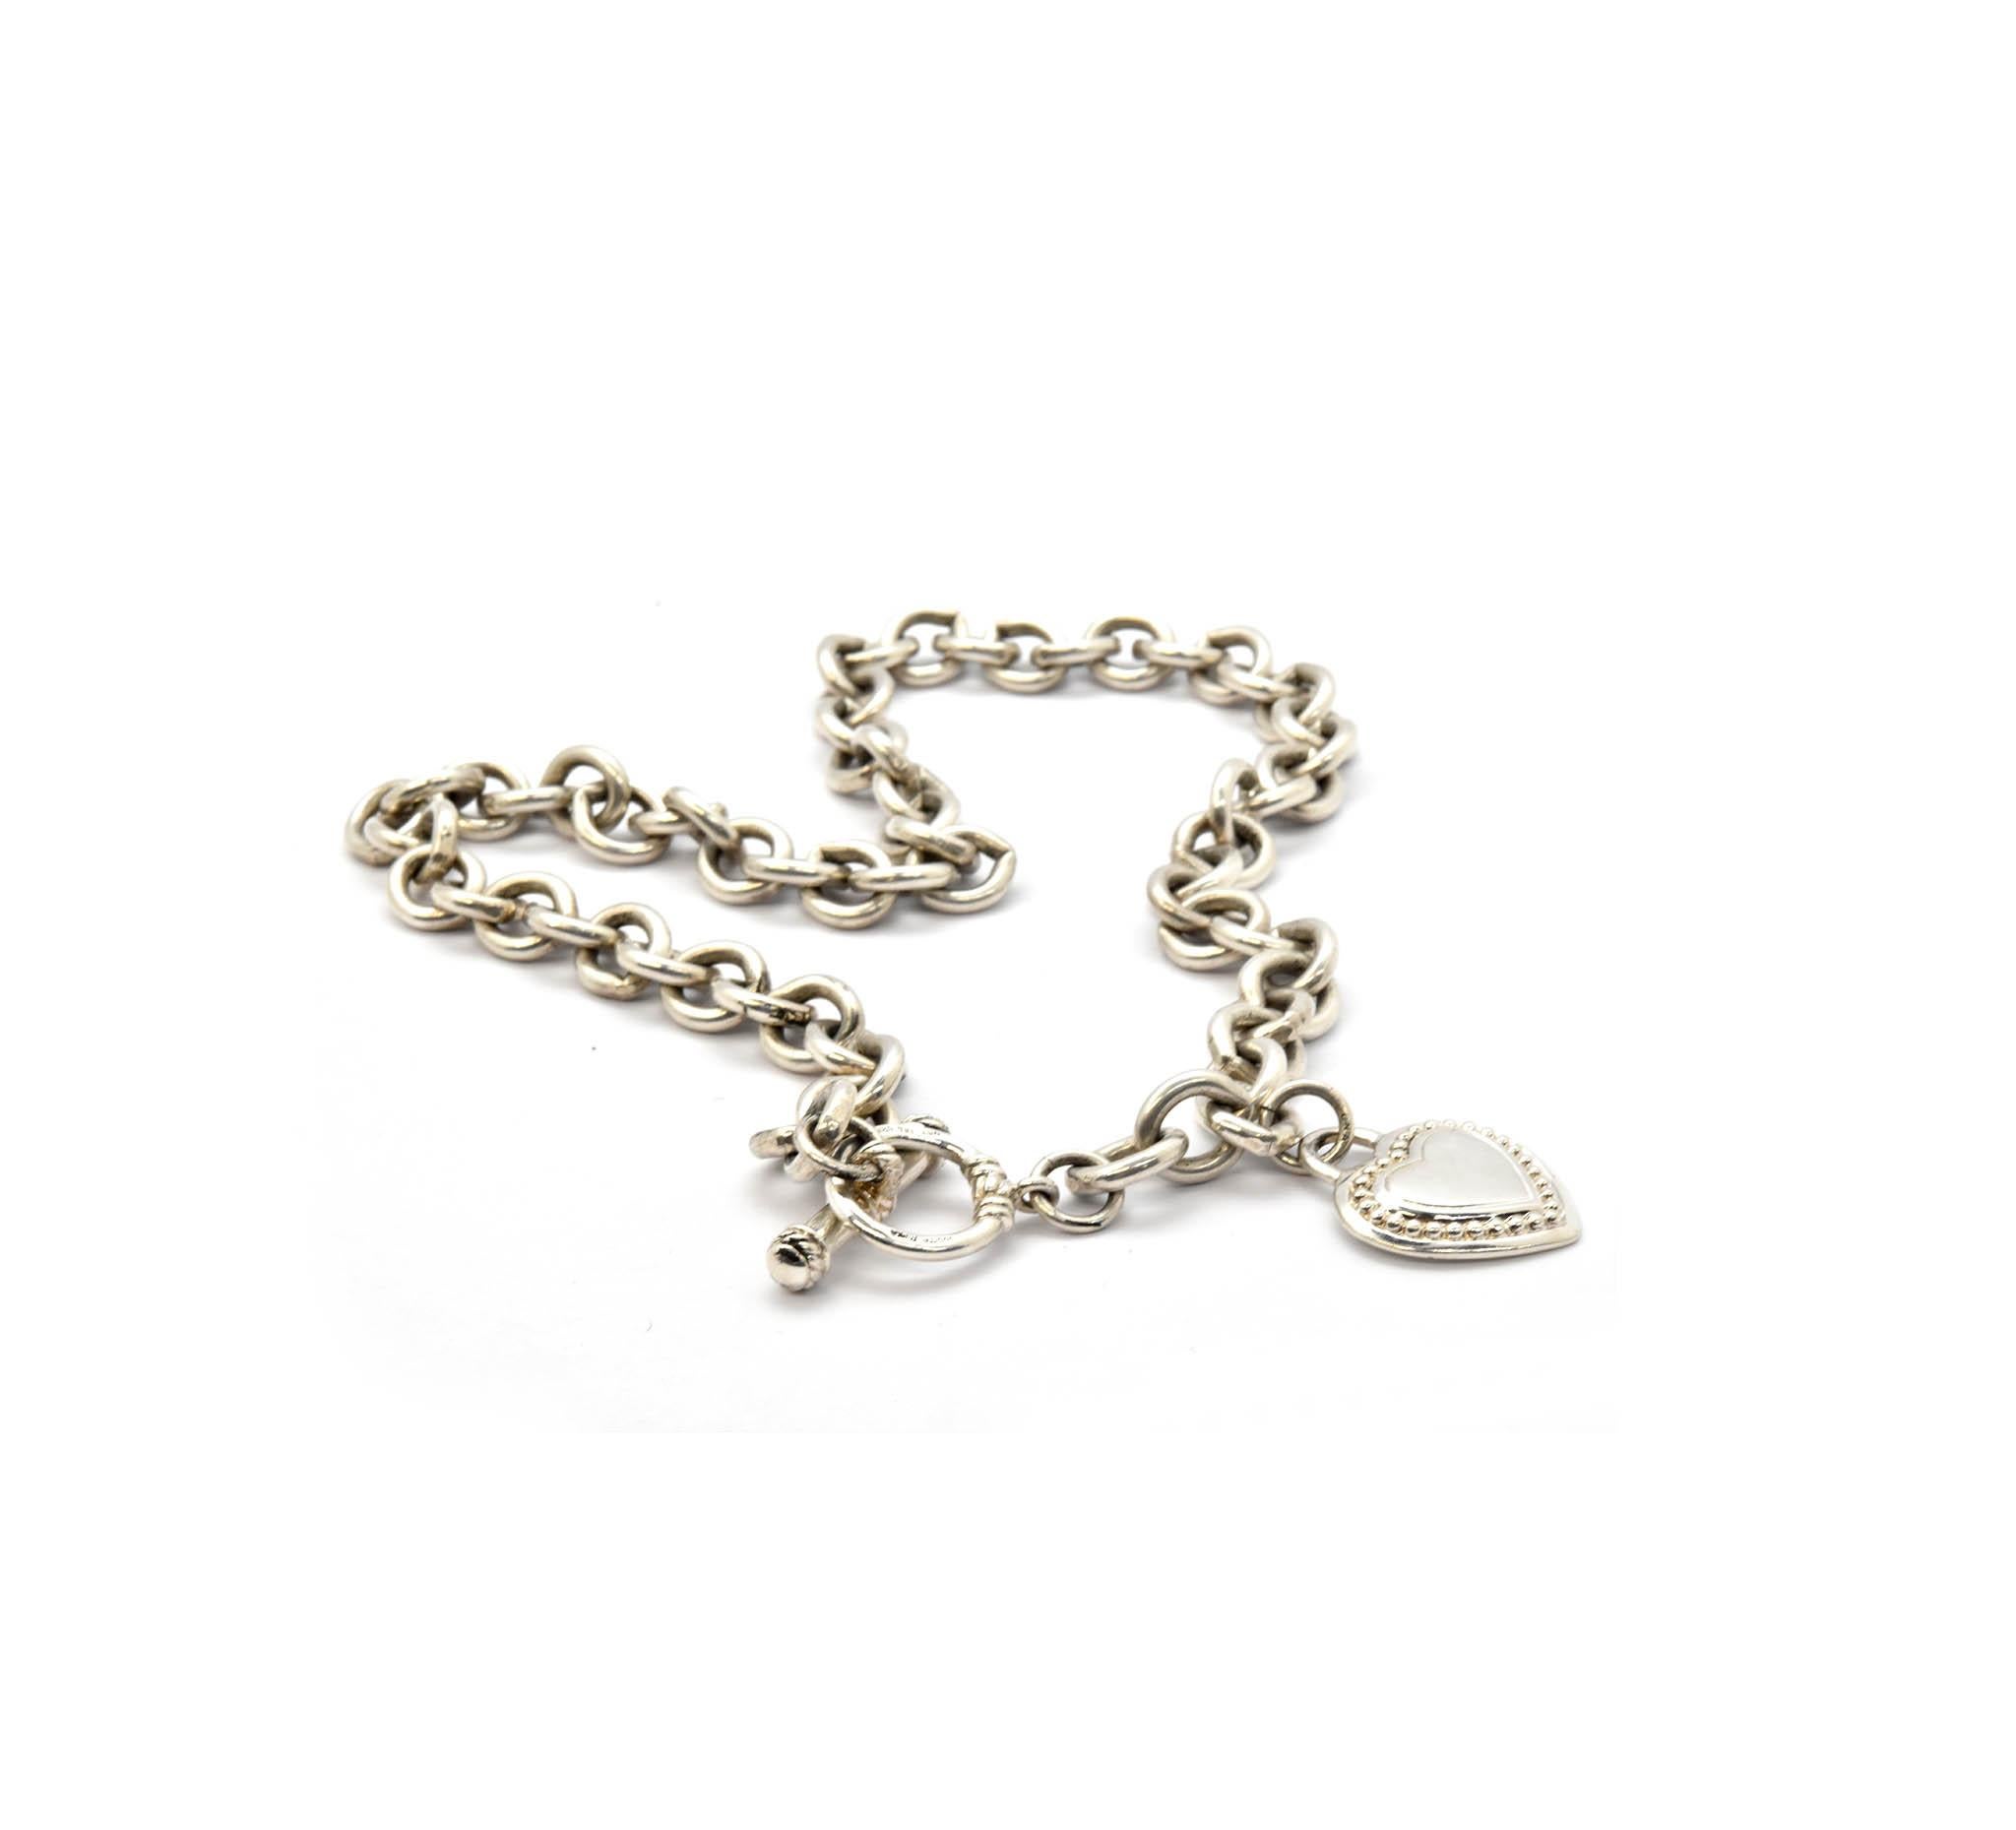 This is a Judith Ripka sterling silver chain necklace with a heart charm. The necklace consists of 20” inches of sterling silver oval shaped links with a toggle closure. The Judith Ripka heart charm measures 28x23.5mm. Classic Judith Ripka cable